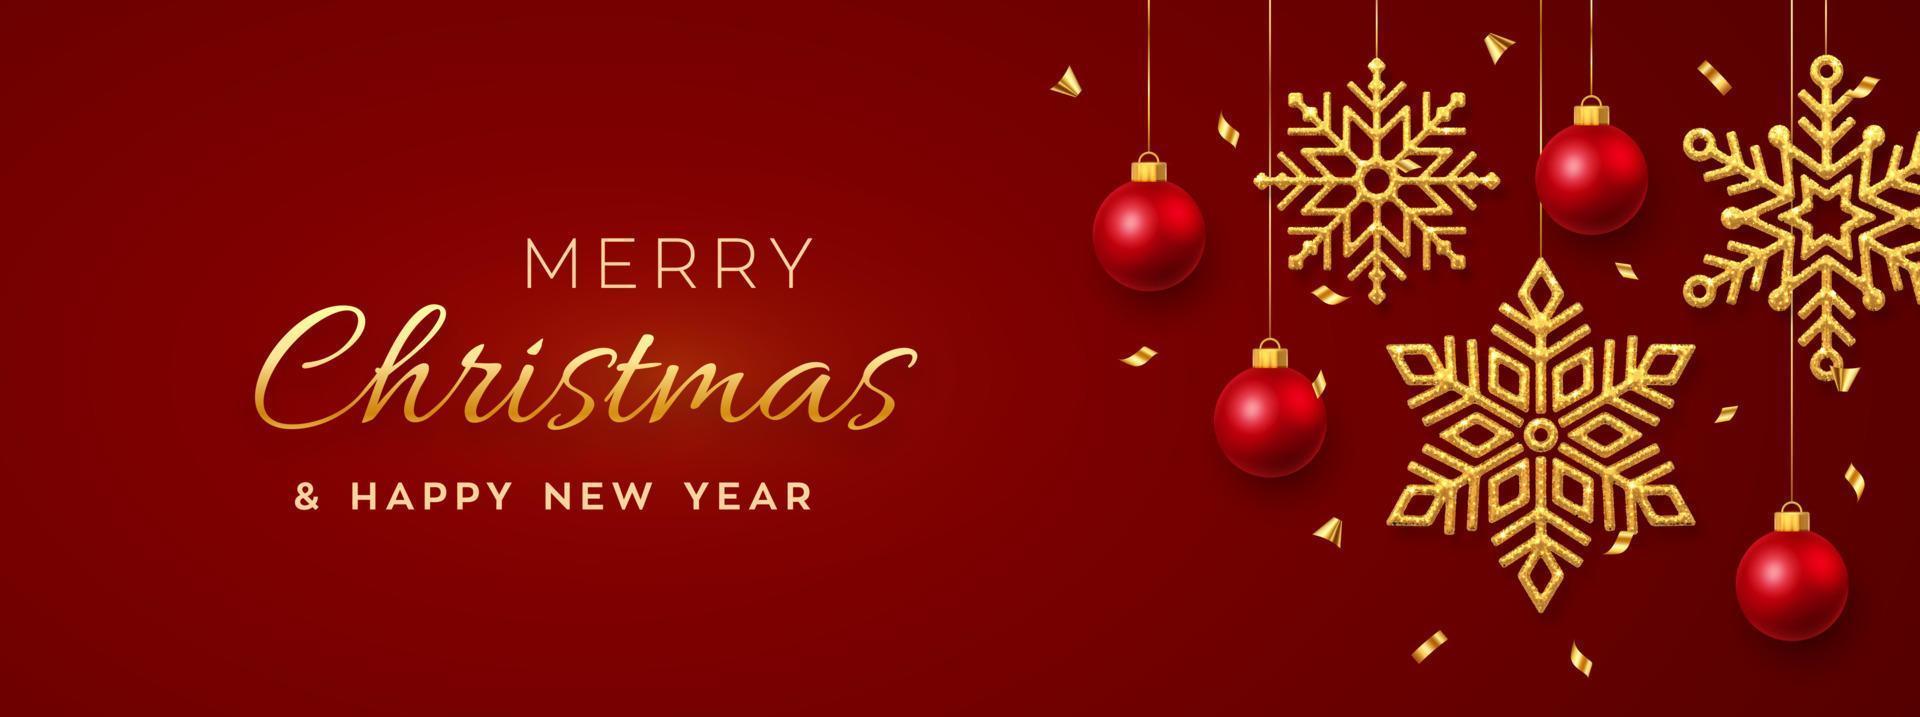 Christmas red background with hanging shining golden snowflakes and balls. Merry christmas greeting card. Holiday Xmas and New Year poster, web banner, header website. Vector Illustration.